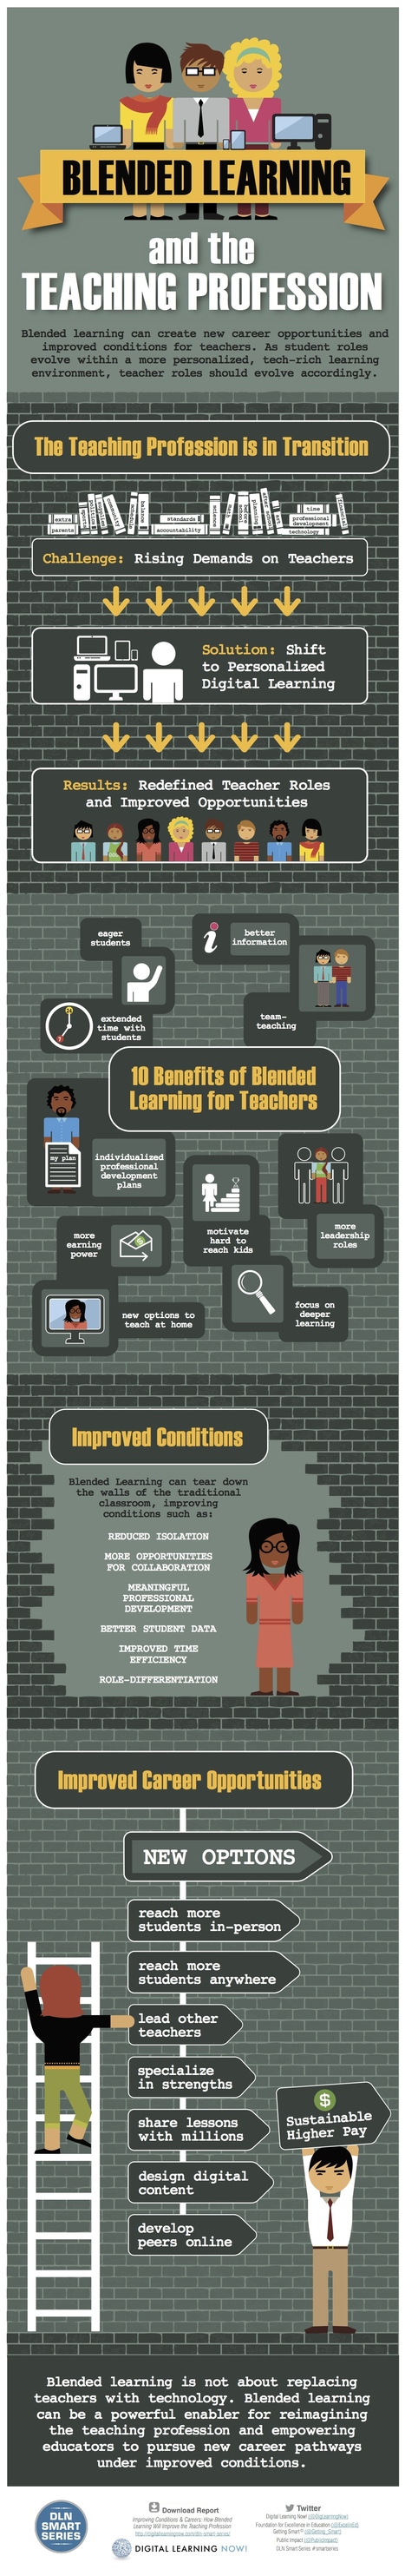 Blended Learning & The Teaching Profession [Infographic] | Pedalogica: educación y TIC | Scoop.it